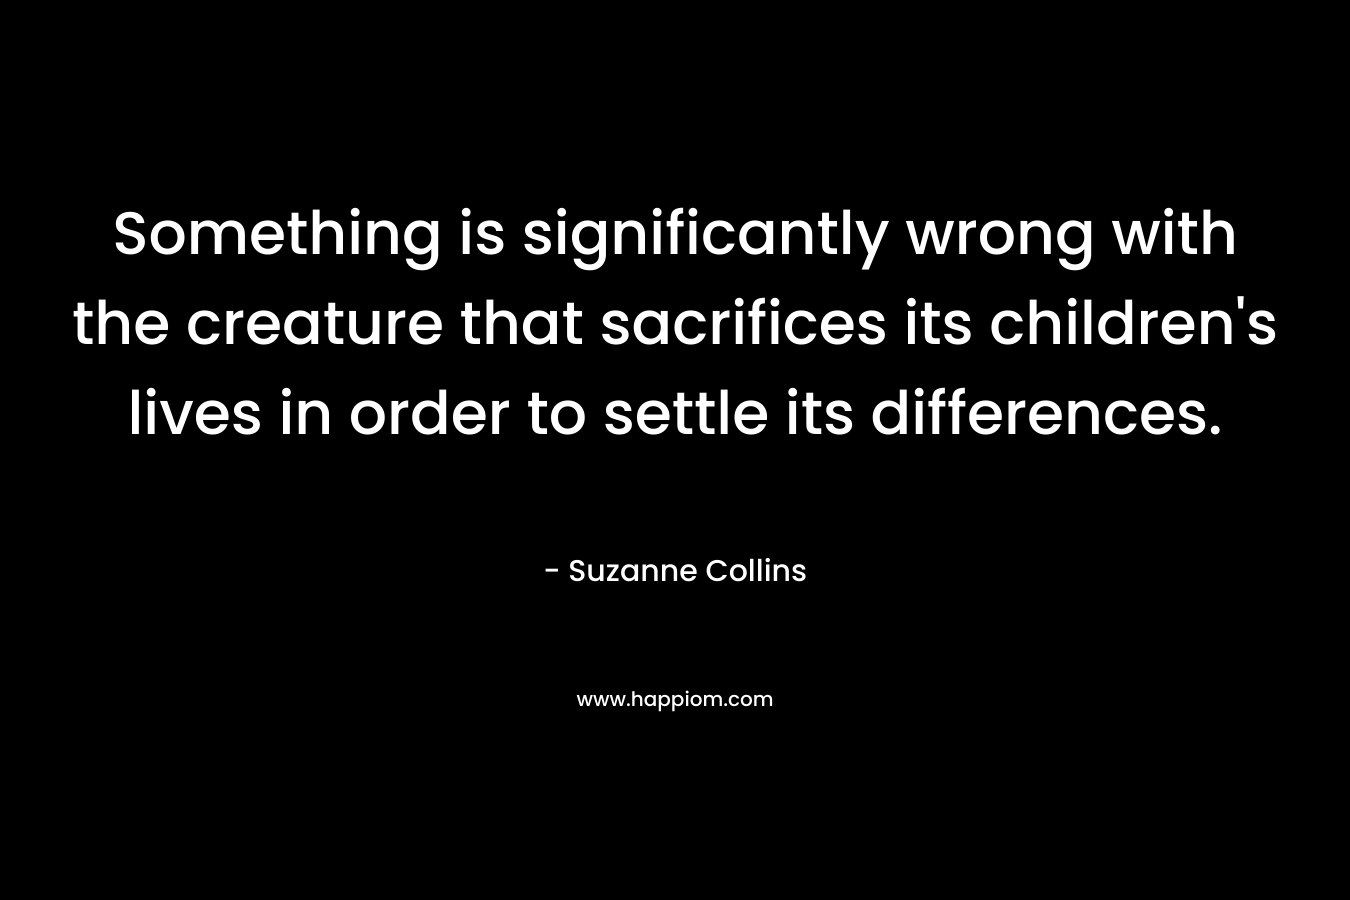 Something is significantly wrong with the creature that sacrifices its children’s lives in order to settle its differences. – Suzanne Collins